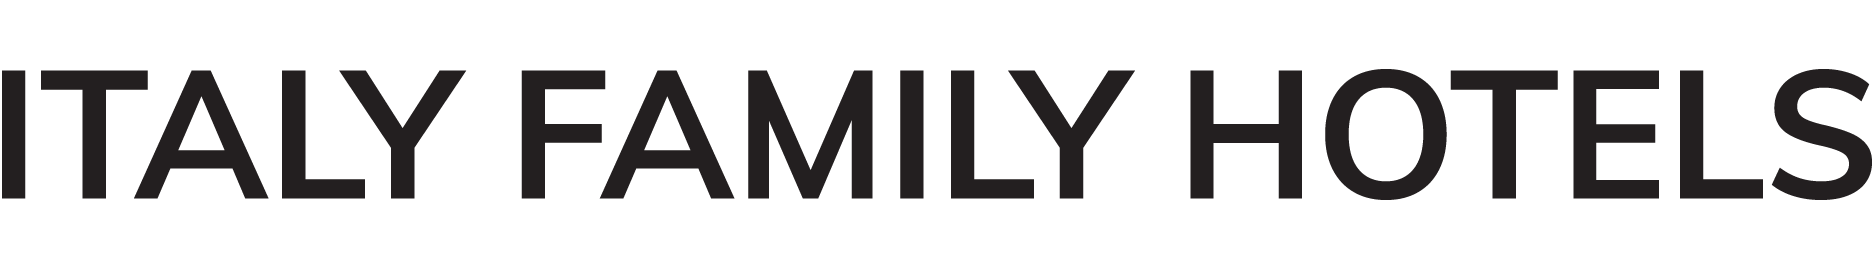 logo_italy_family_hotels_120x40.png